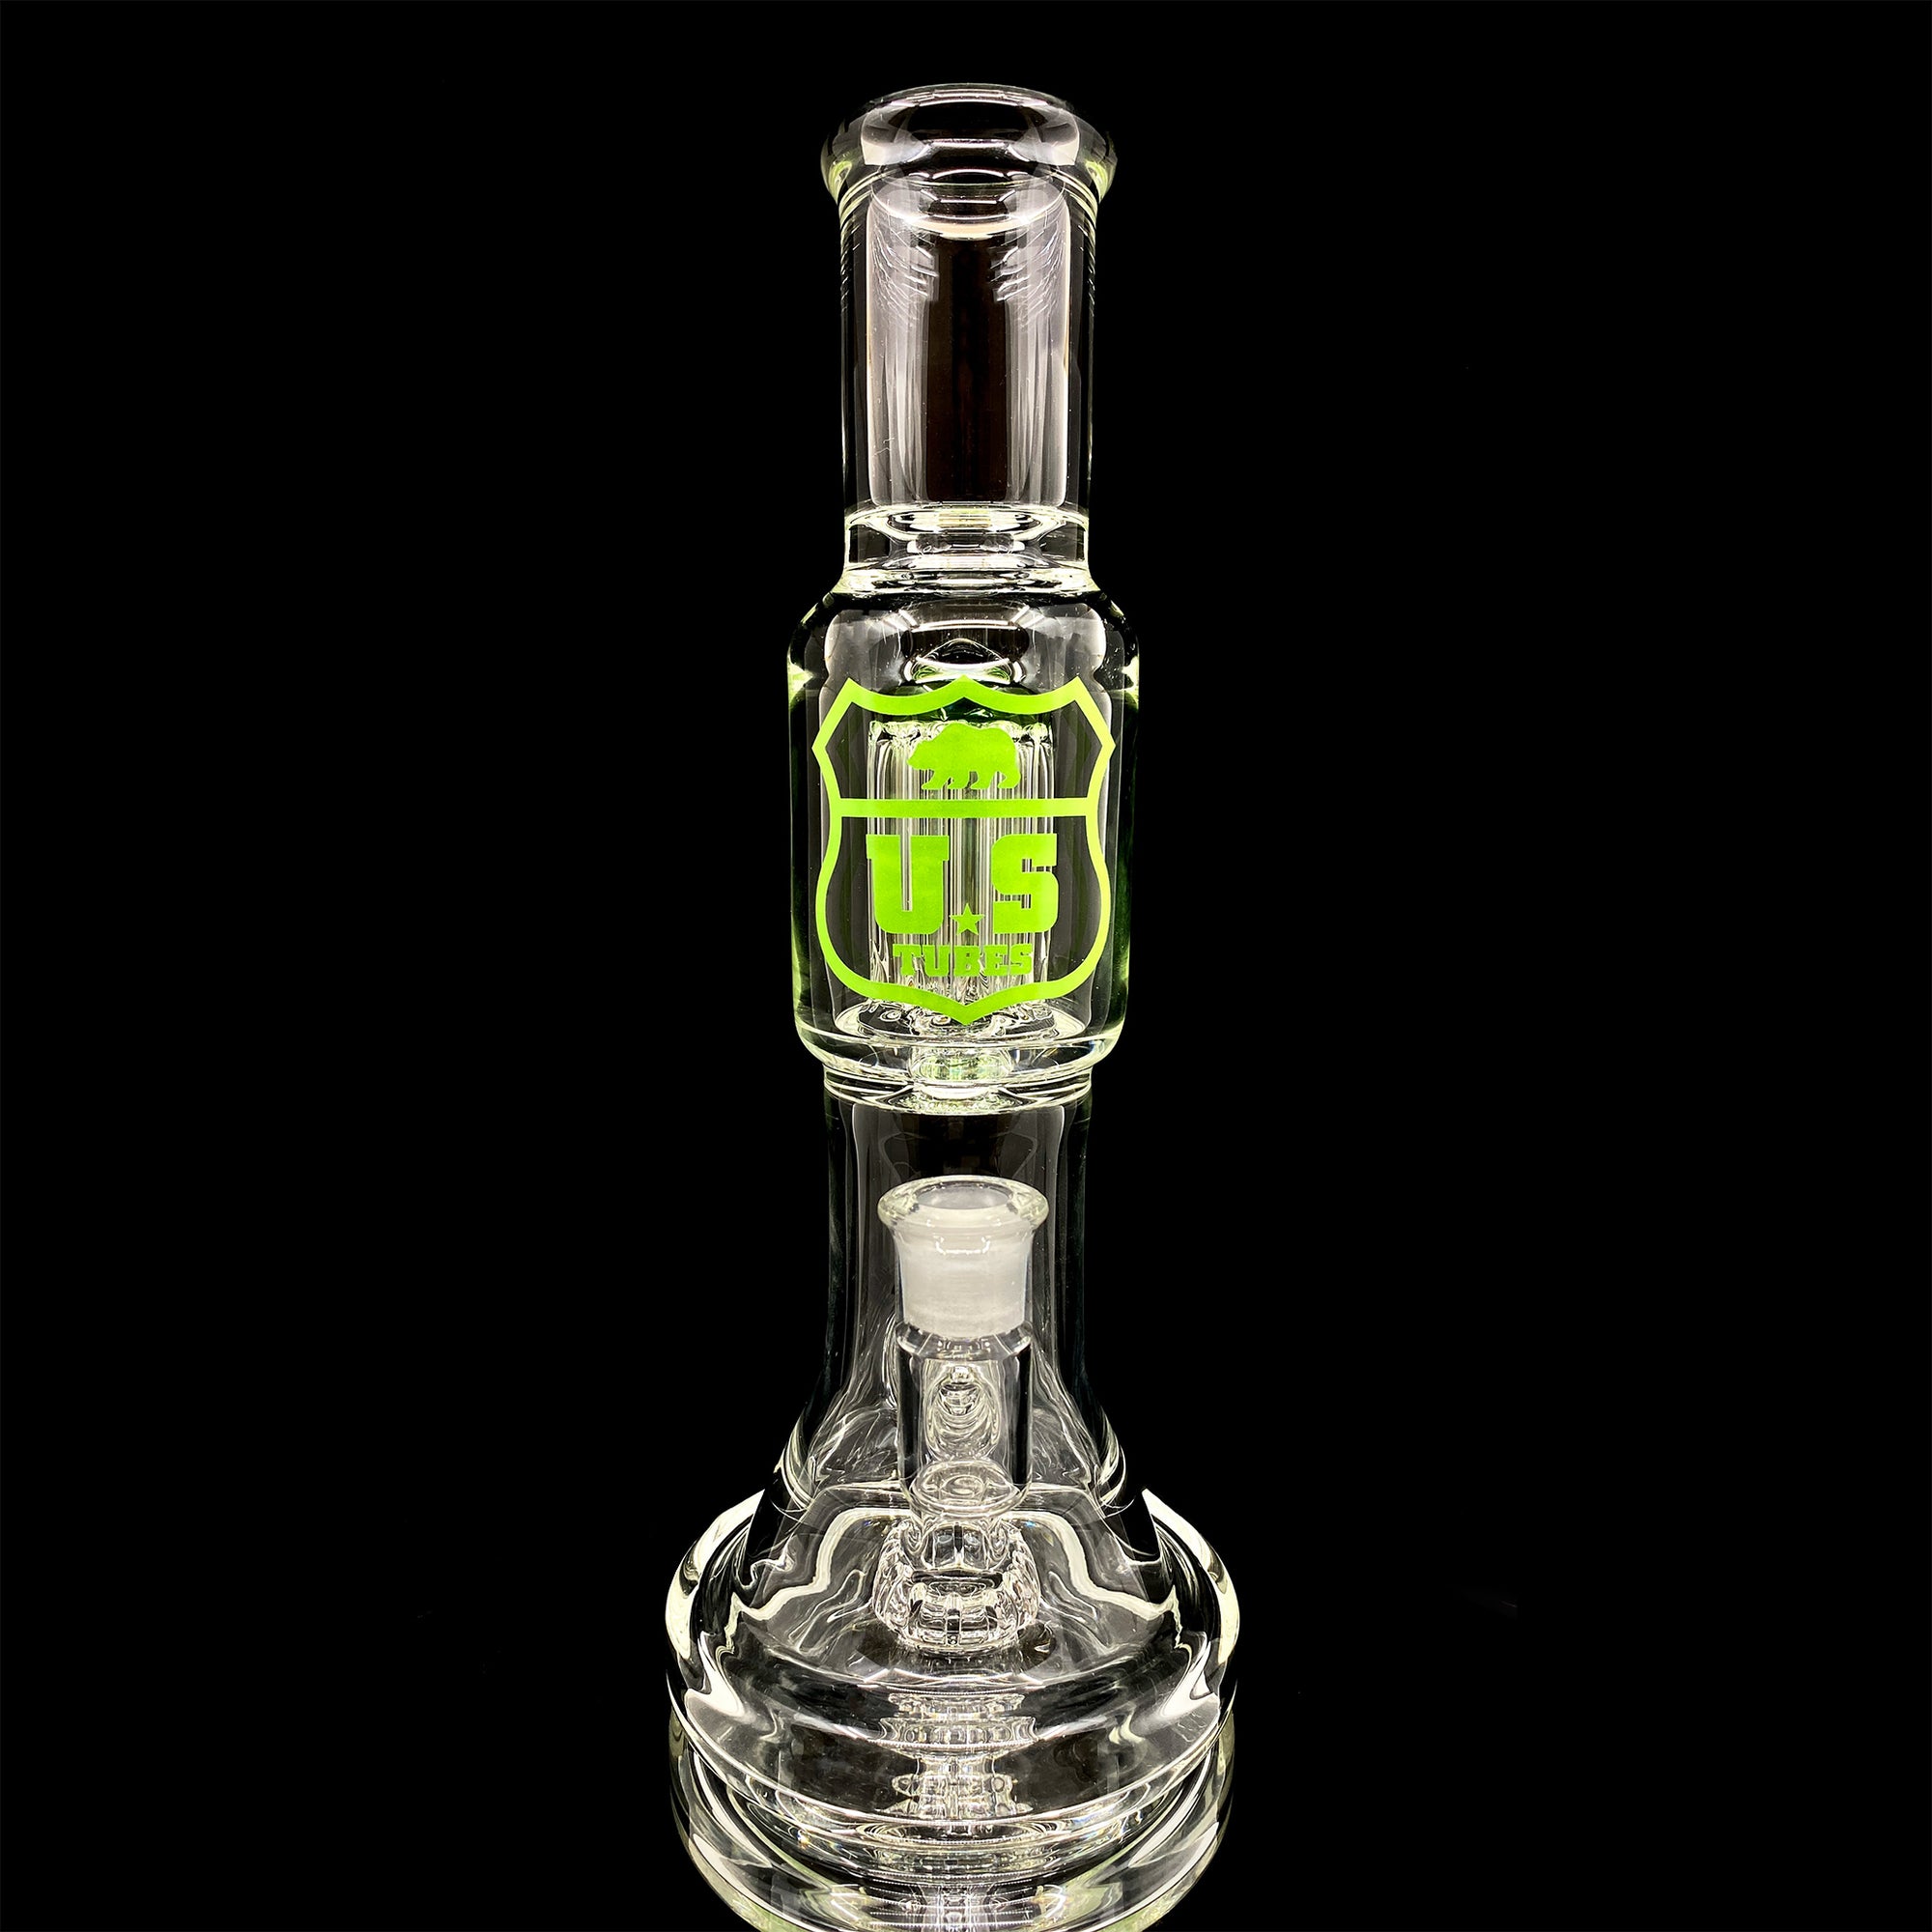 US Tubes Simple Hybrid Fixed with 10 Arm Tree Perc 55, 12 Inch, 14mm